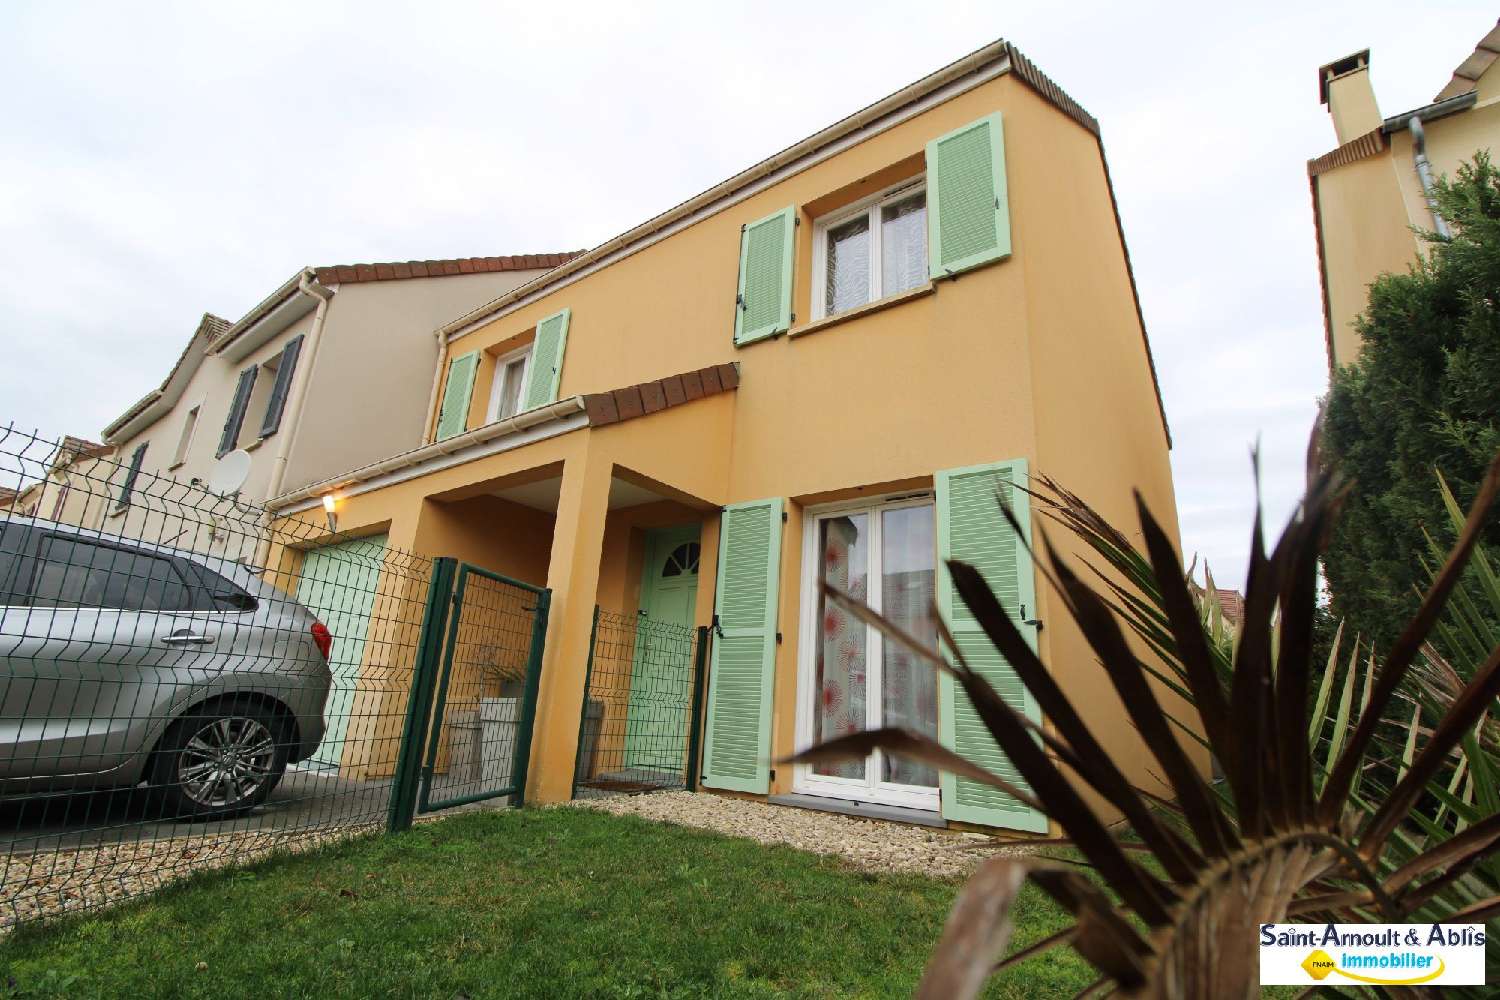  for sale house Ablis Yvelines 1